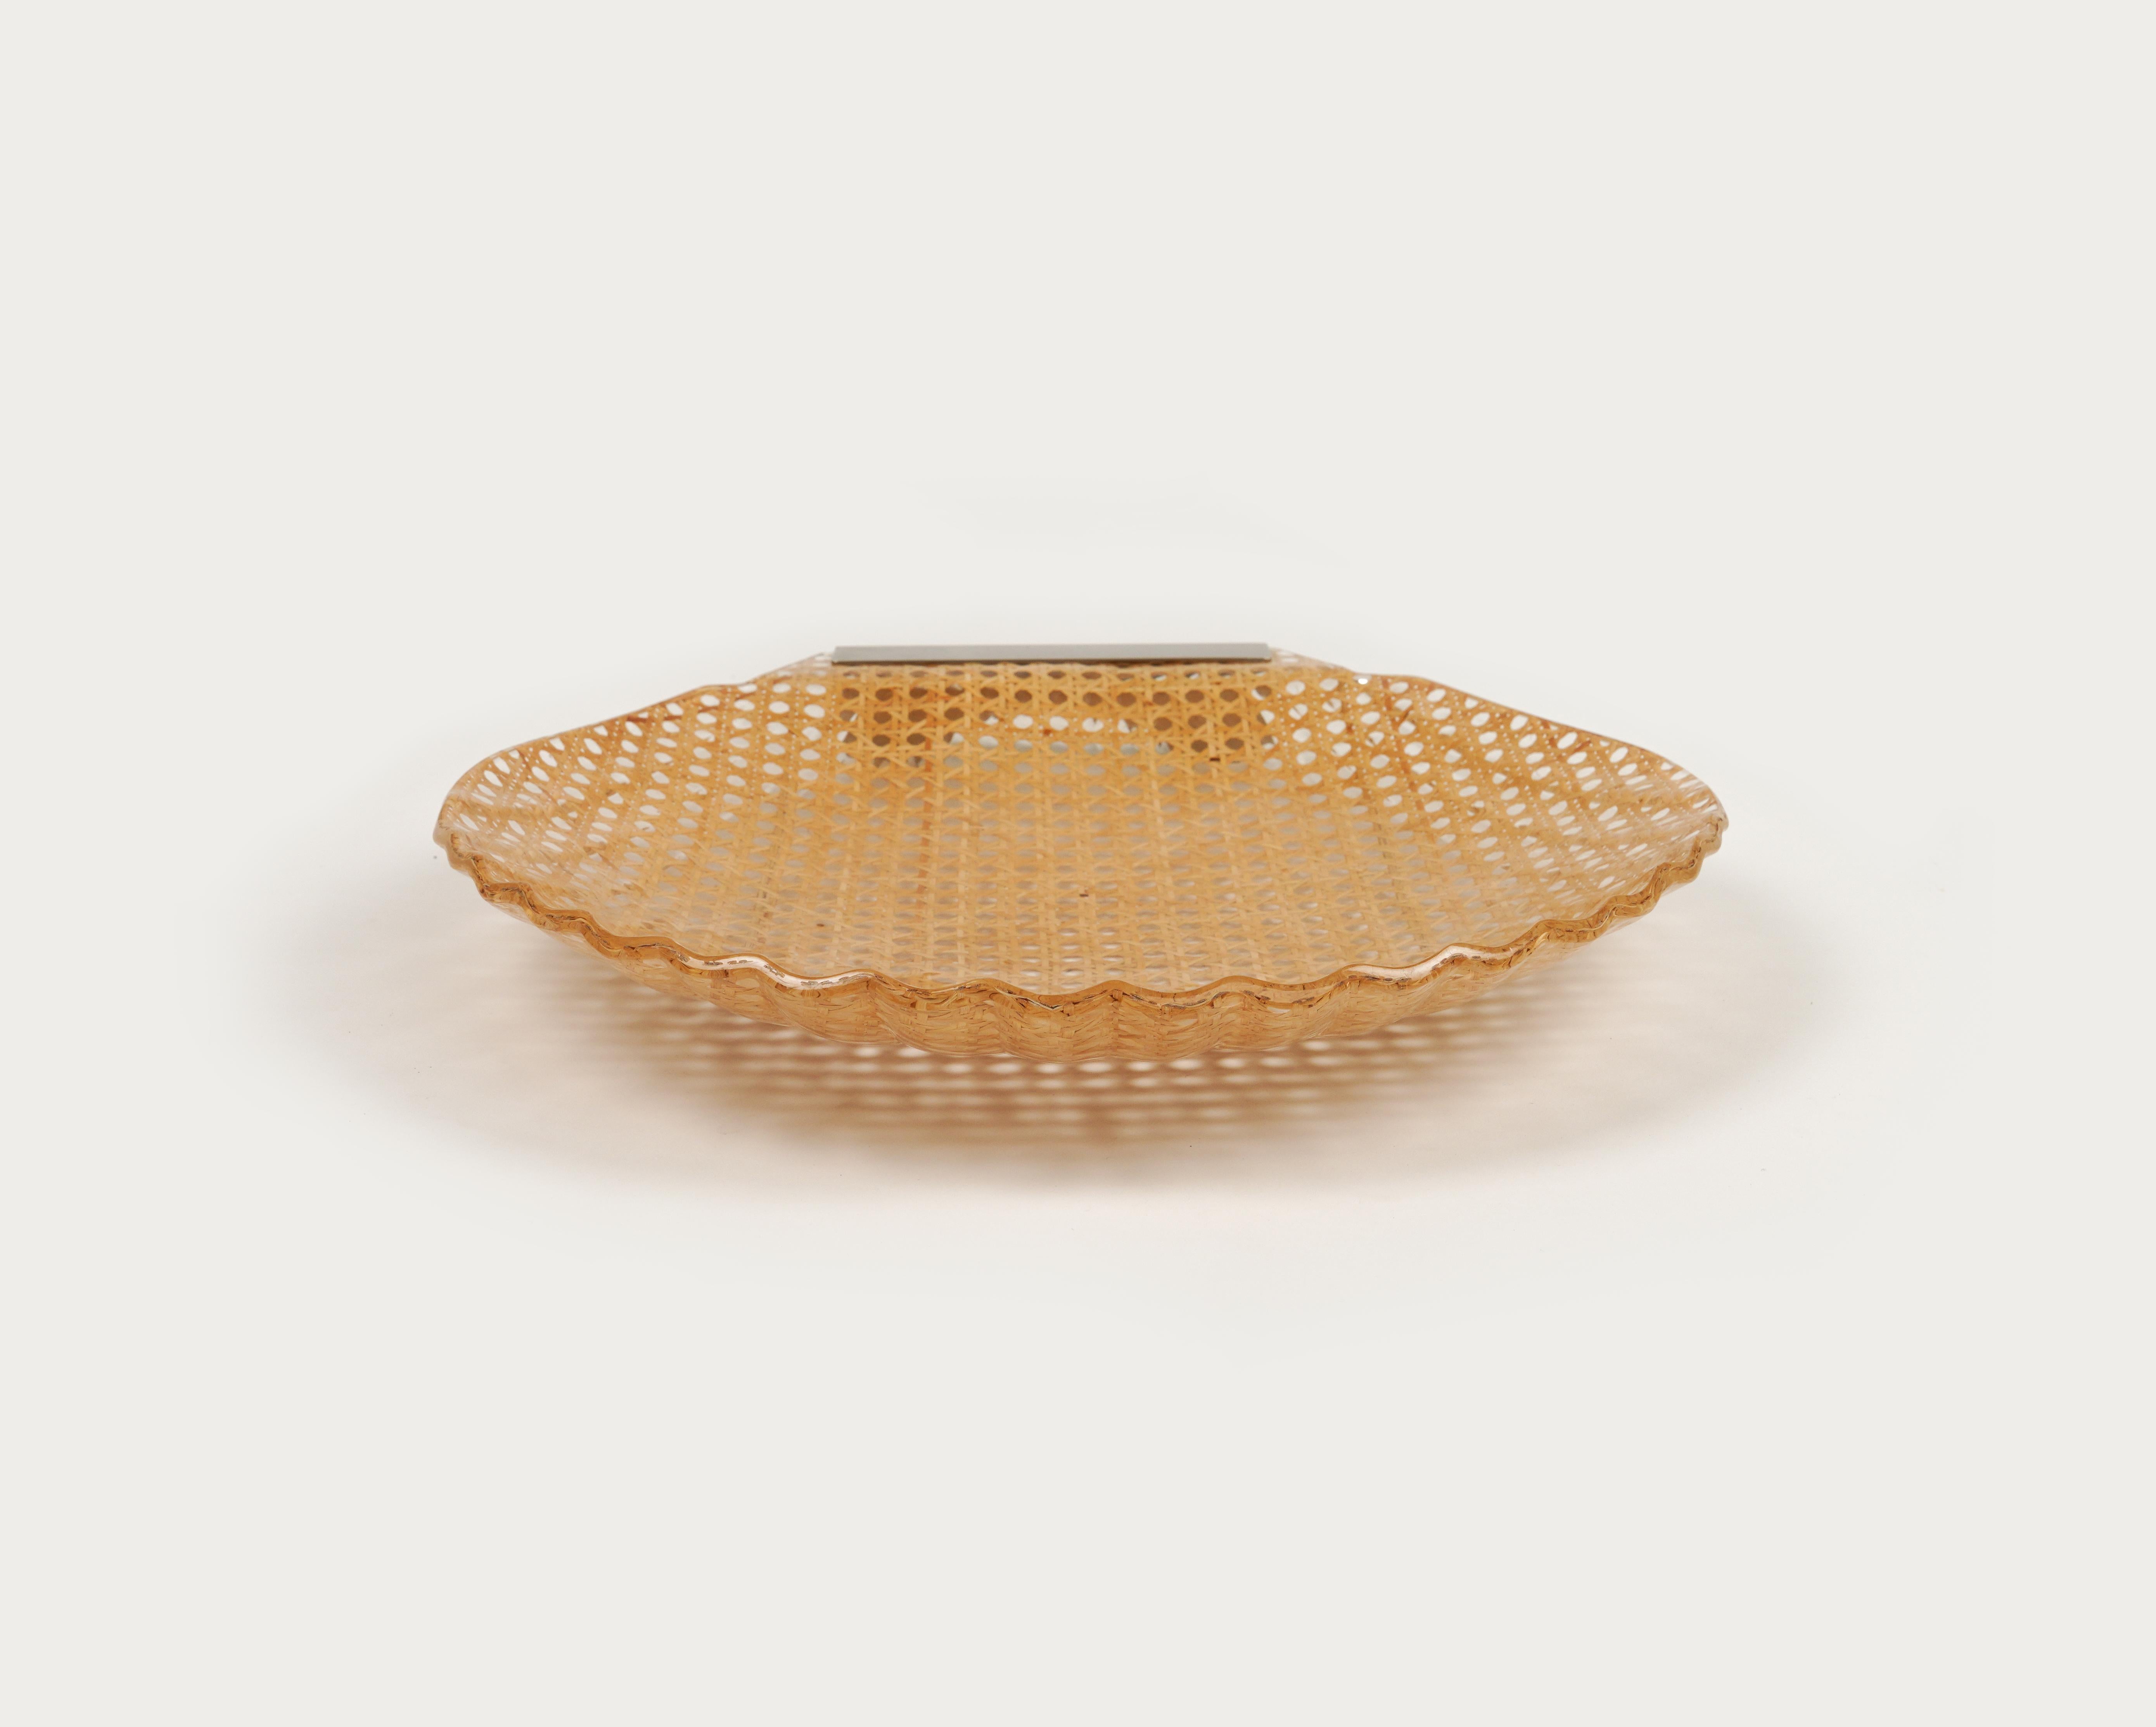 European Shell Serving Tray Lucite and Rattan Christian Dior Style, France, 1970s